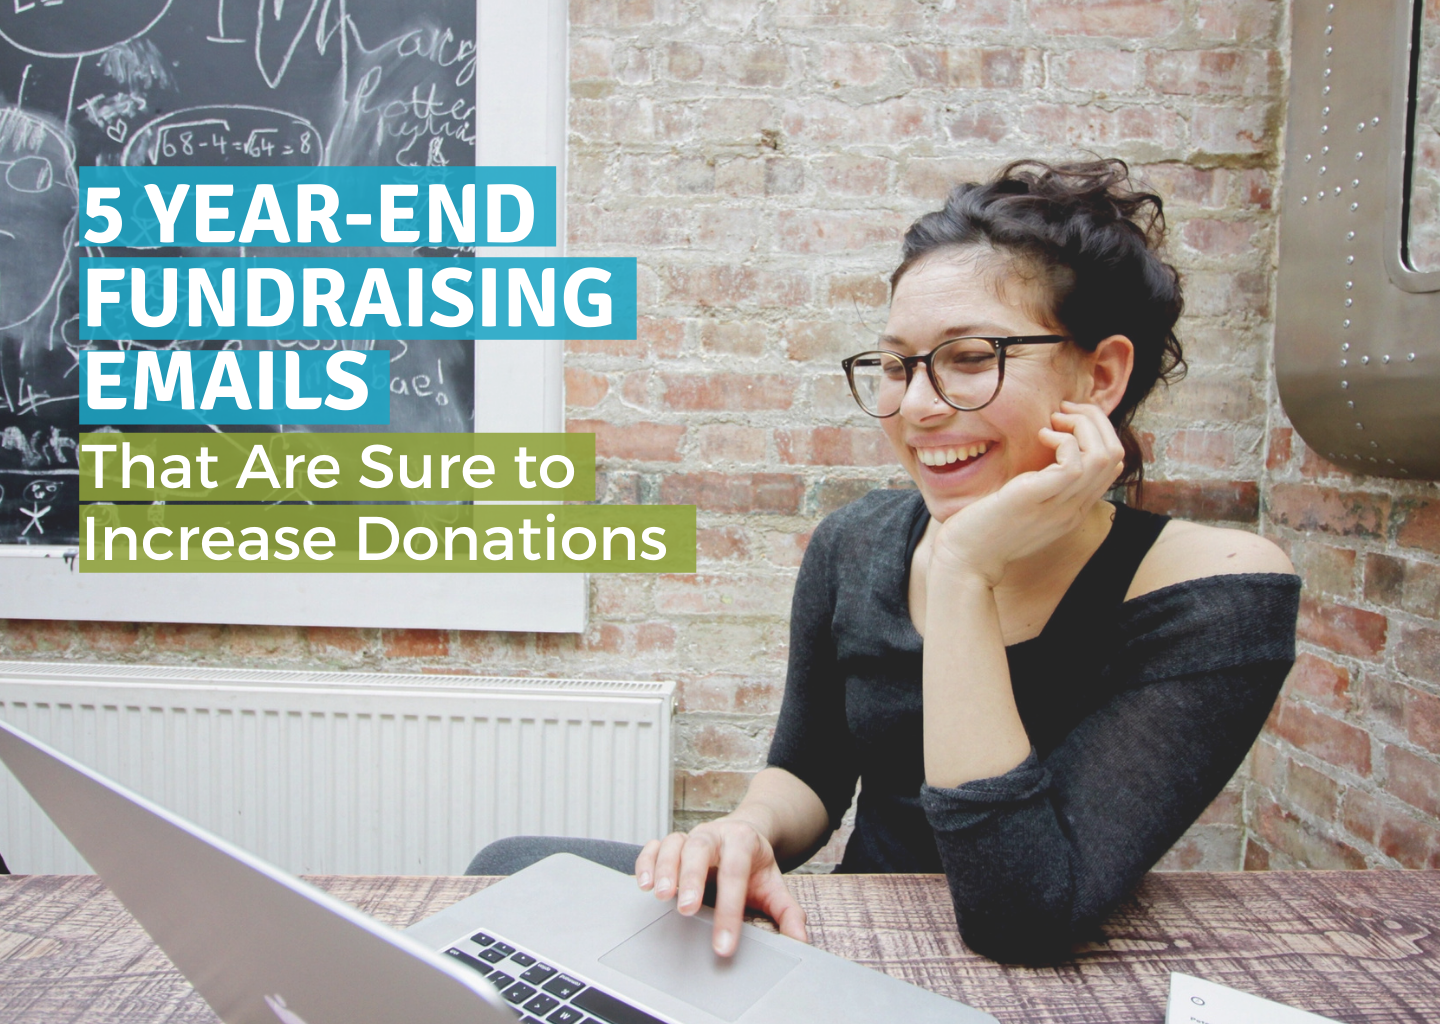 5 Year-End Fundraising Emails That Are Sure to Increase Donations